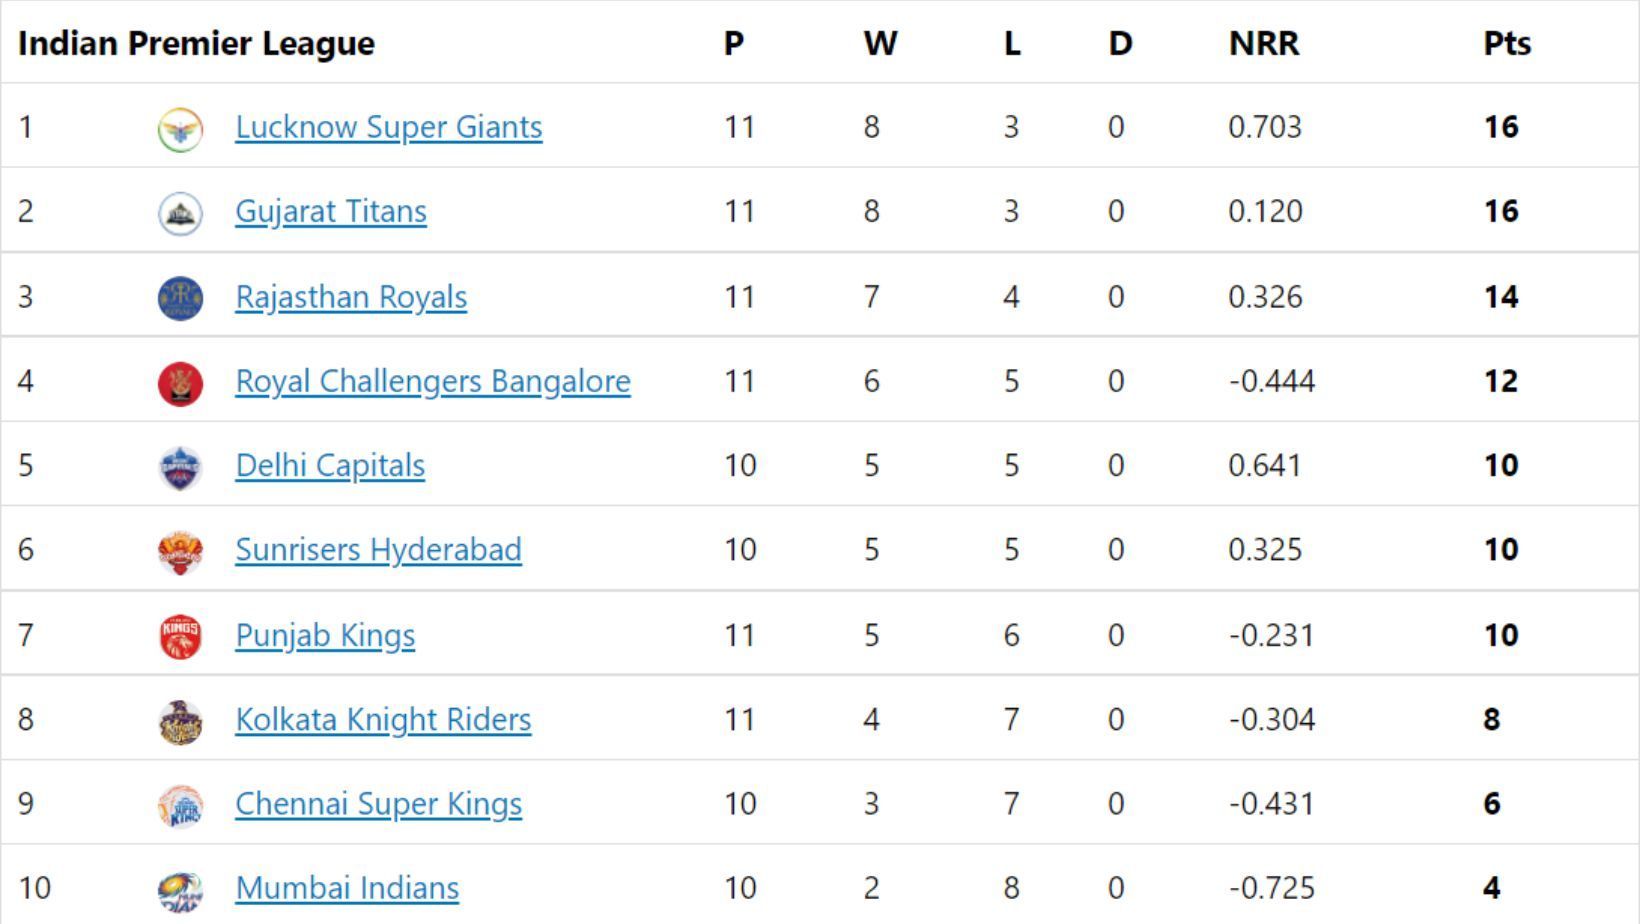 Lucknow Super Giants move to the top of the IPL 2022 points table.